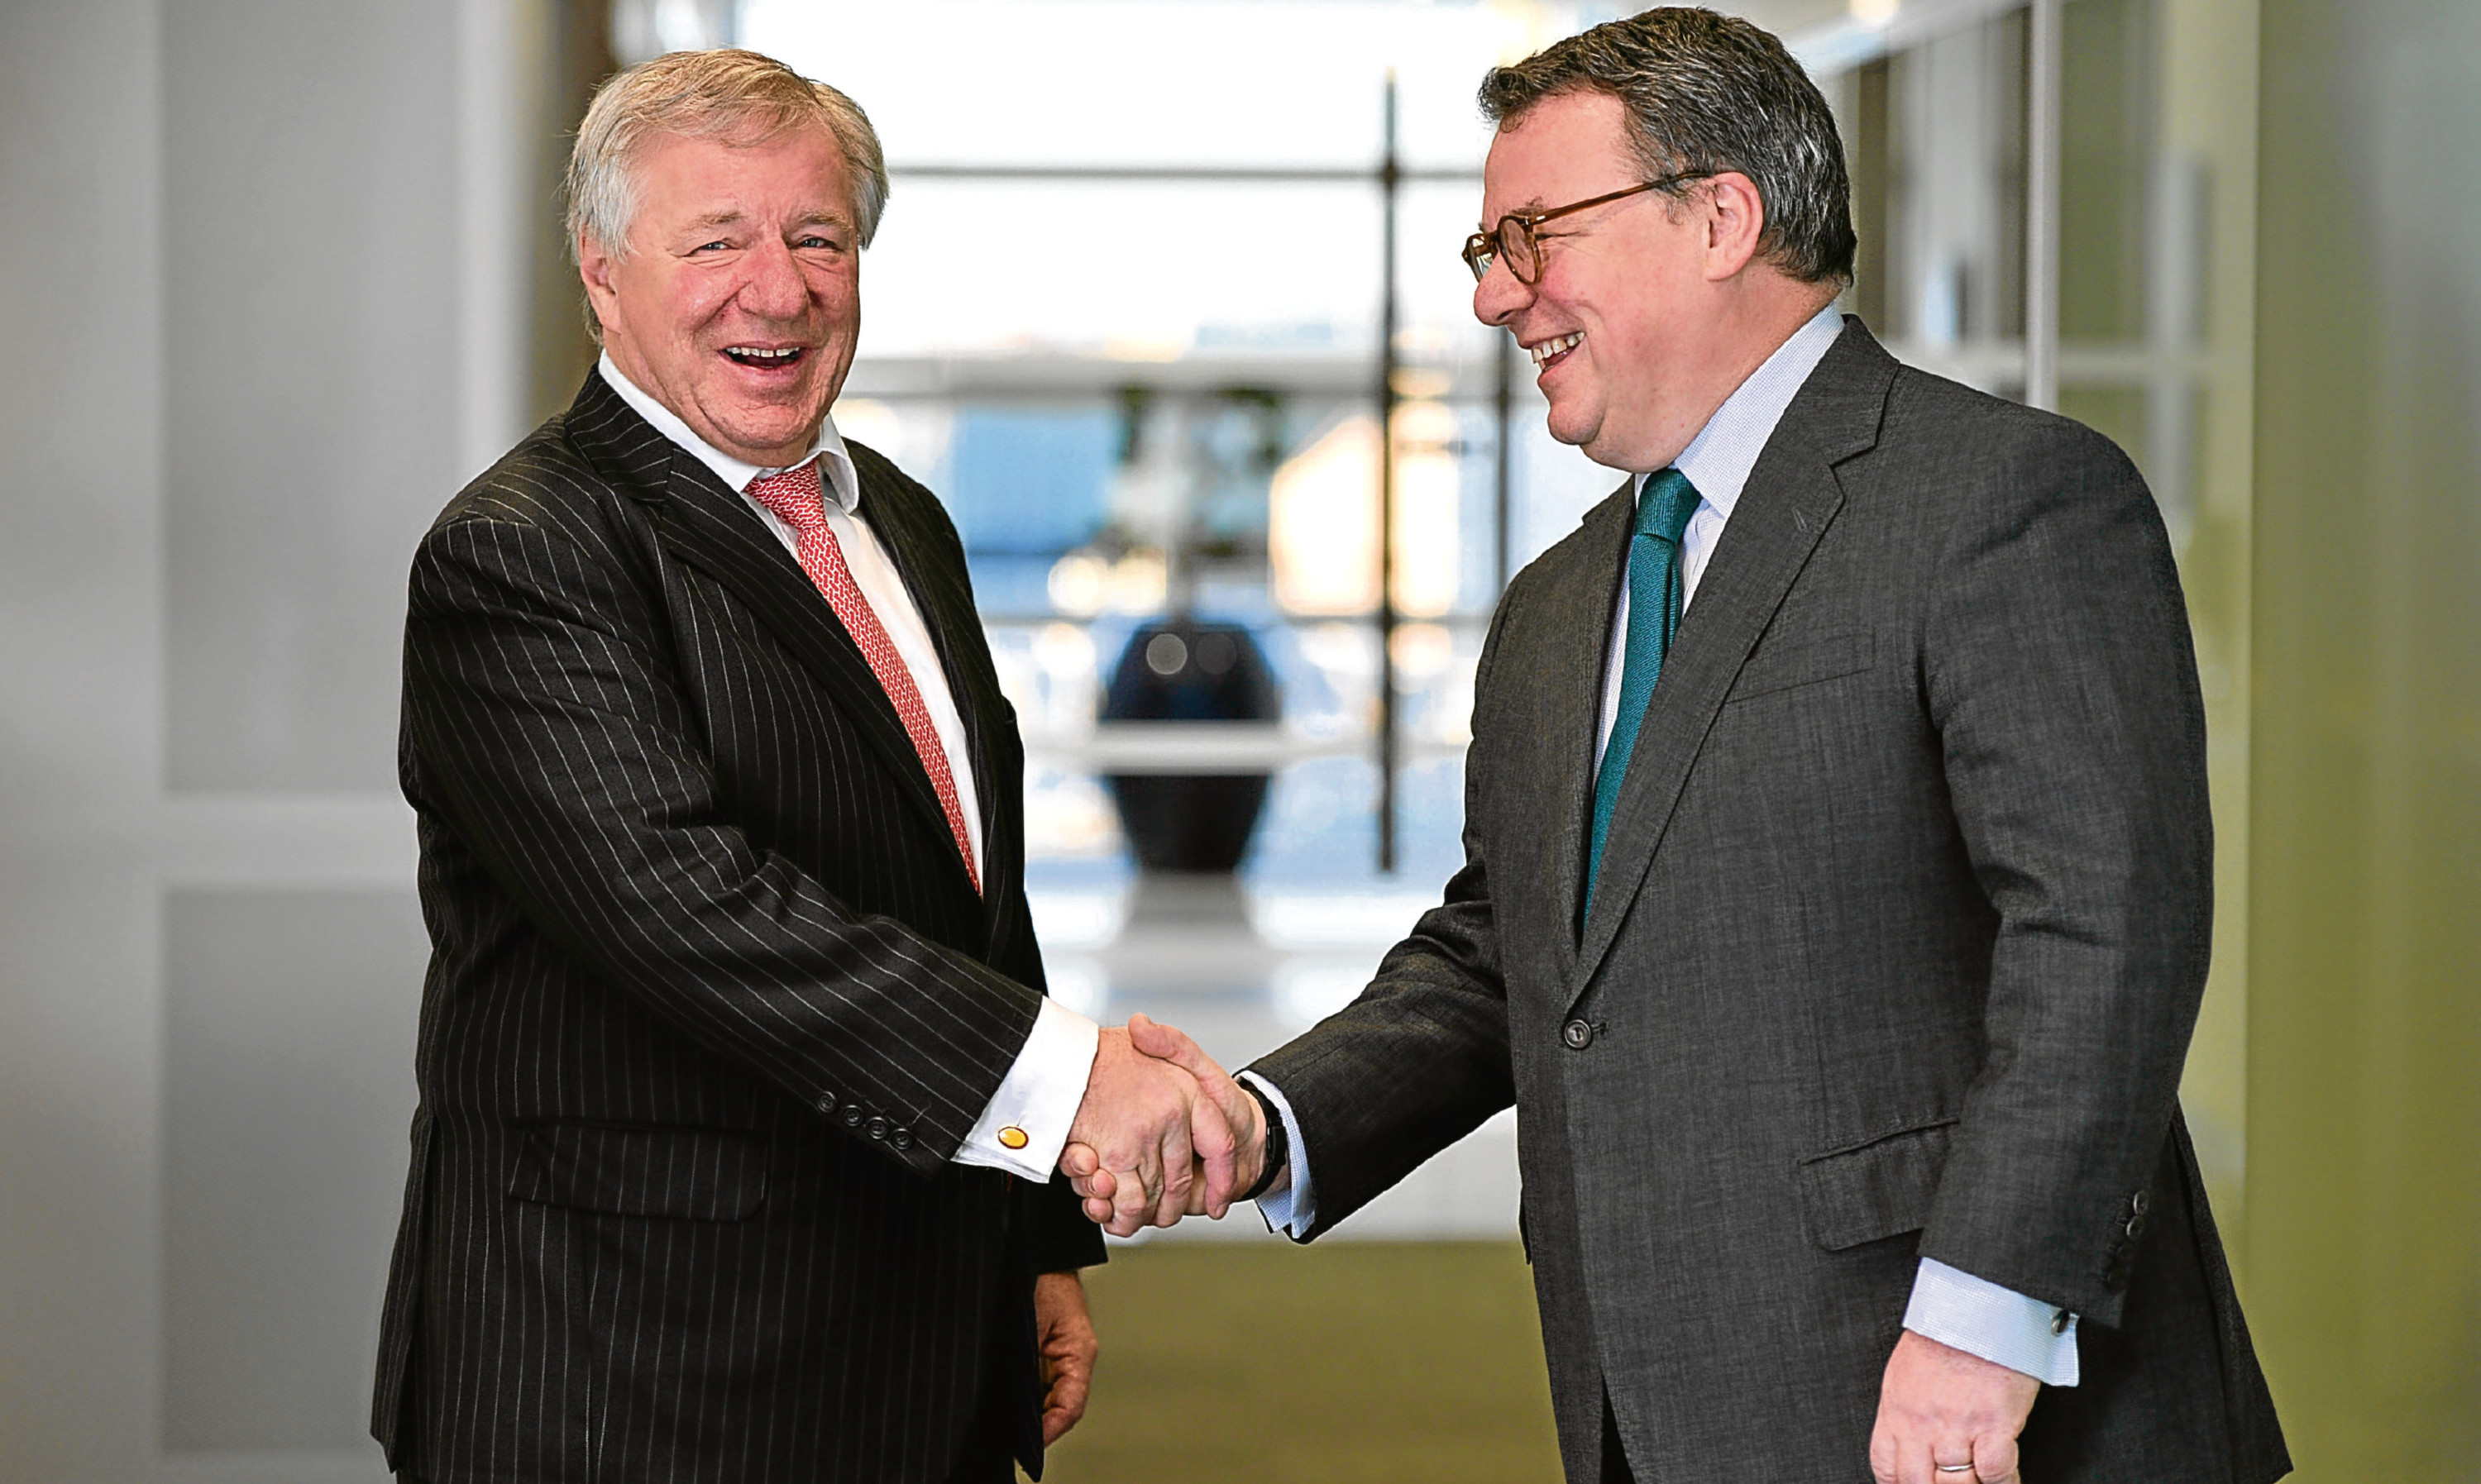 Keith Skeoch, Standard Life CEO, (right) and Martin Gilbert, Aberdeen Asset Management CEO, shake hands after the annoucement of the all share merger in February. They will be joint chiefe executives of the new enlarged firm.